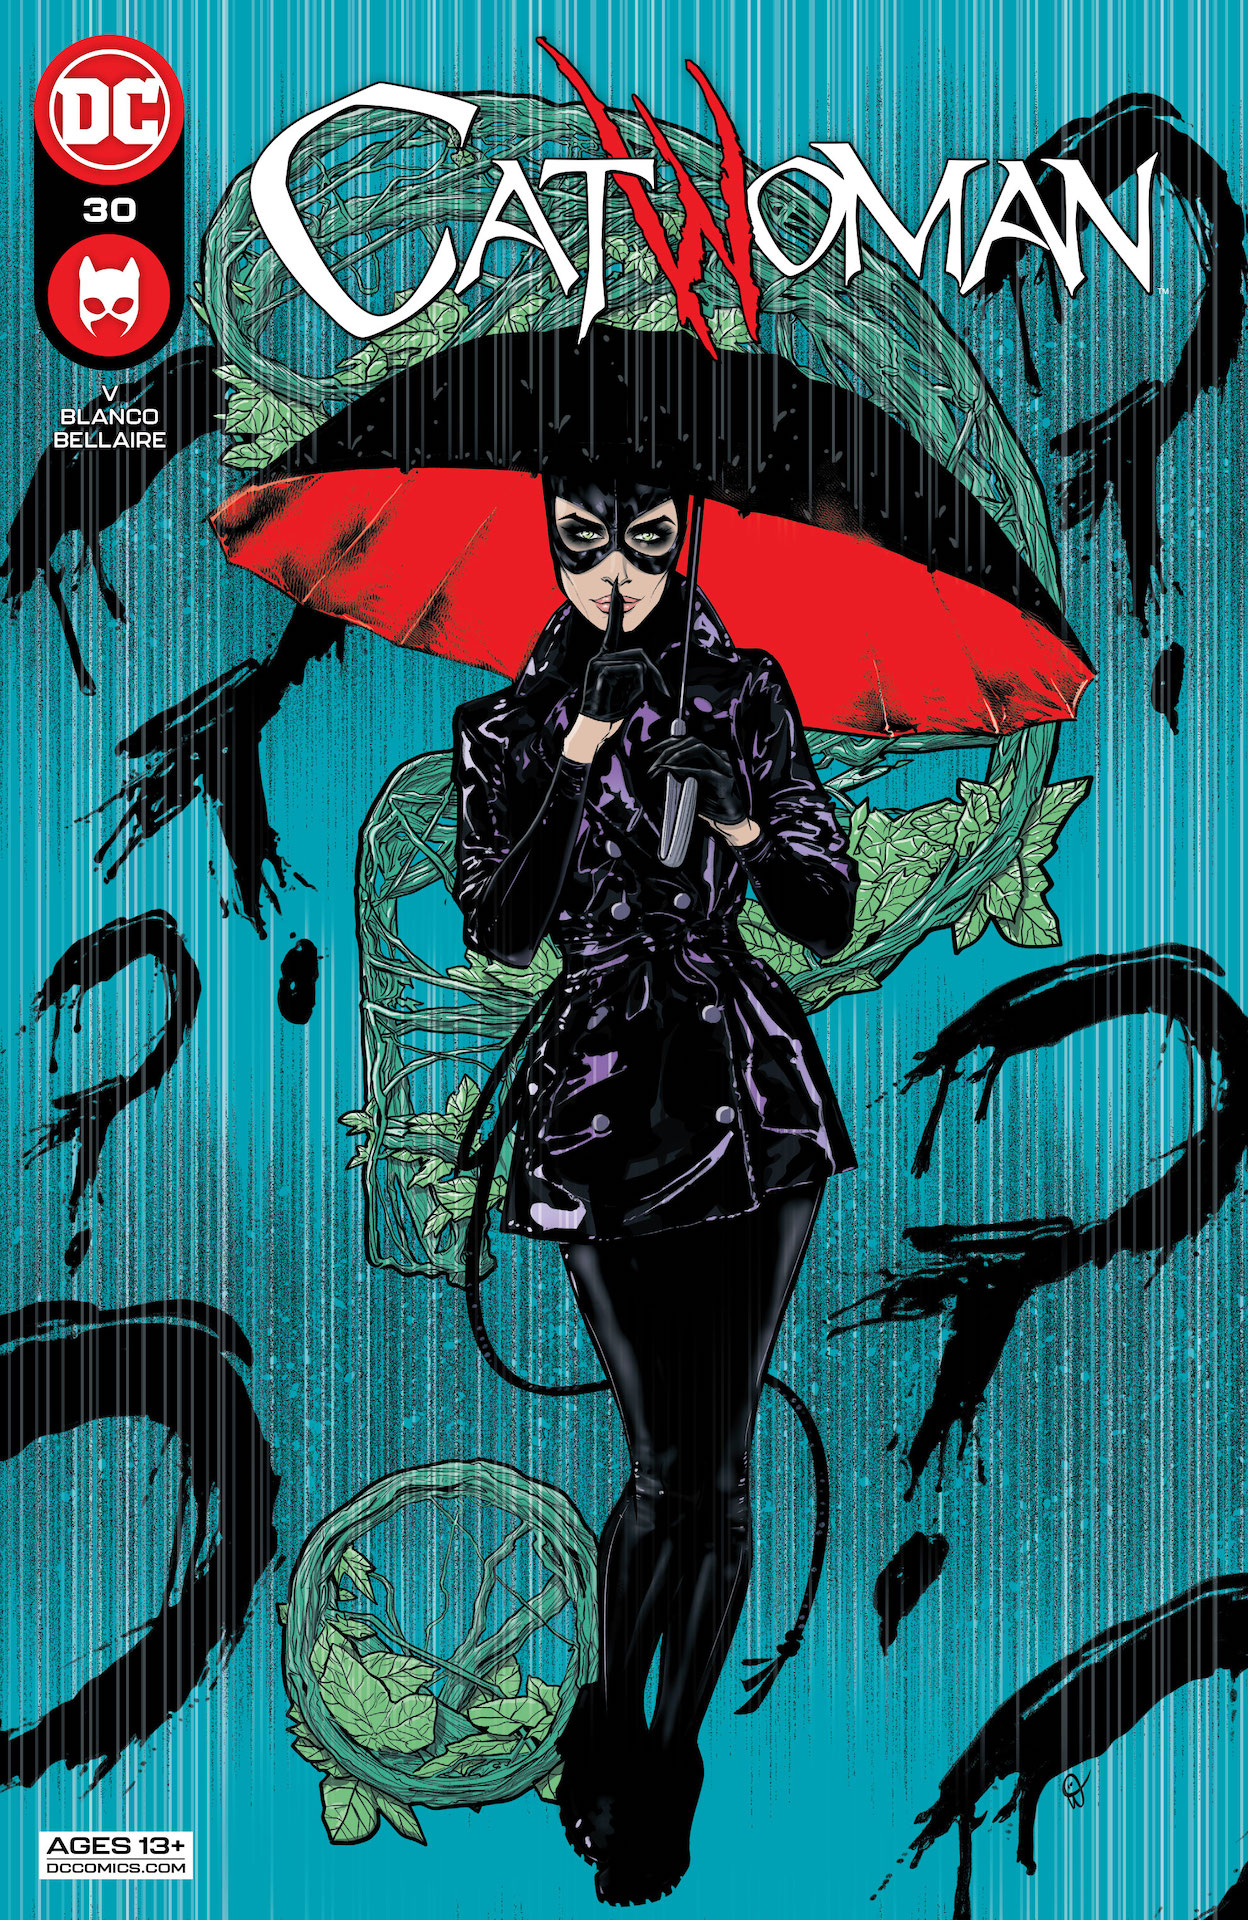 DC Preview: Catwoman #30